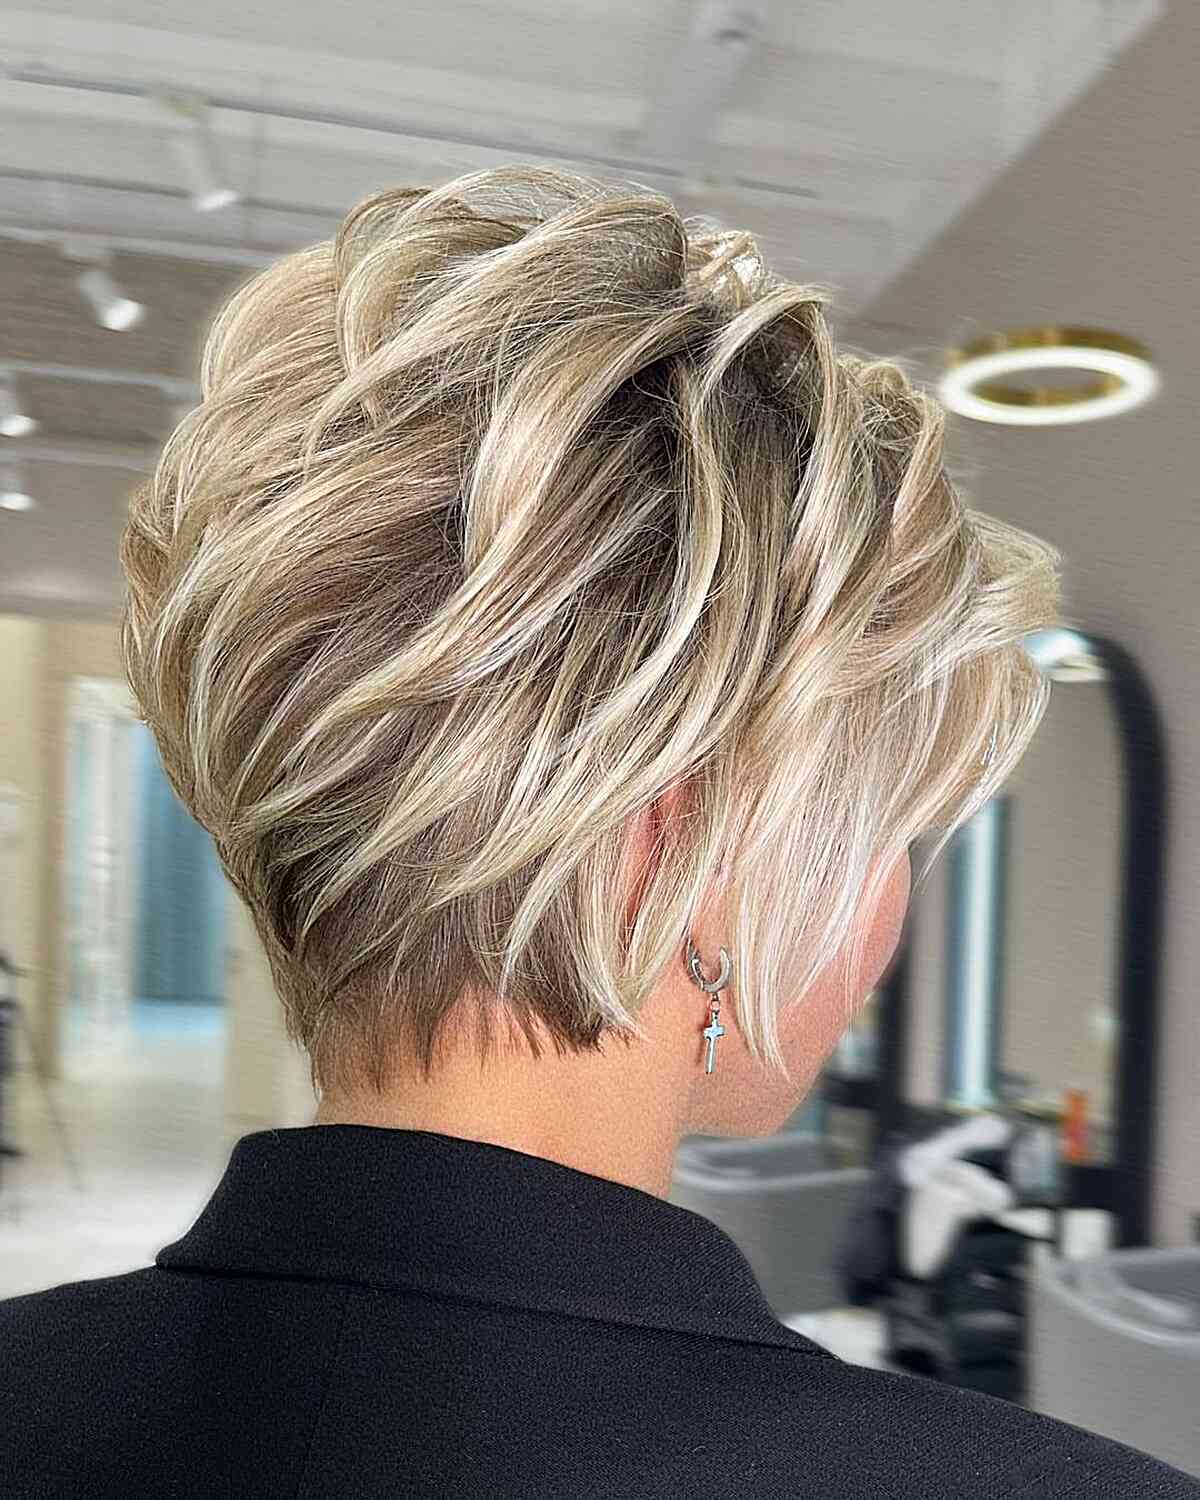 Short Blonde Highlights on a Thick Pixie Cut